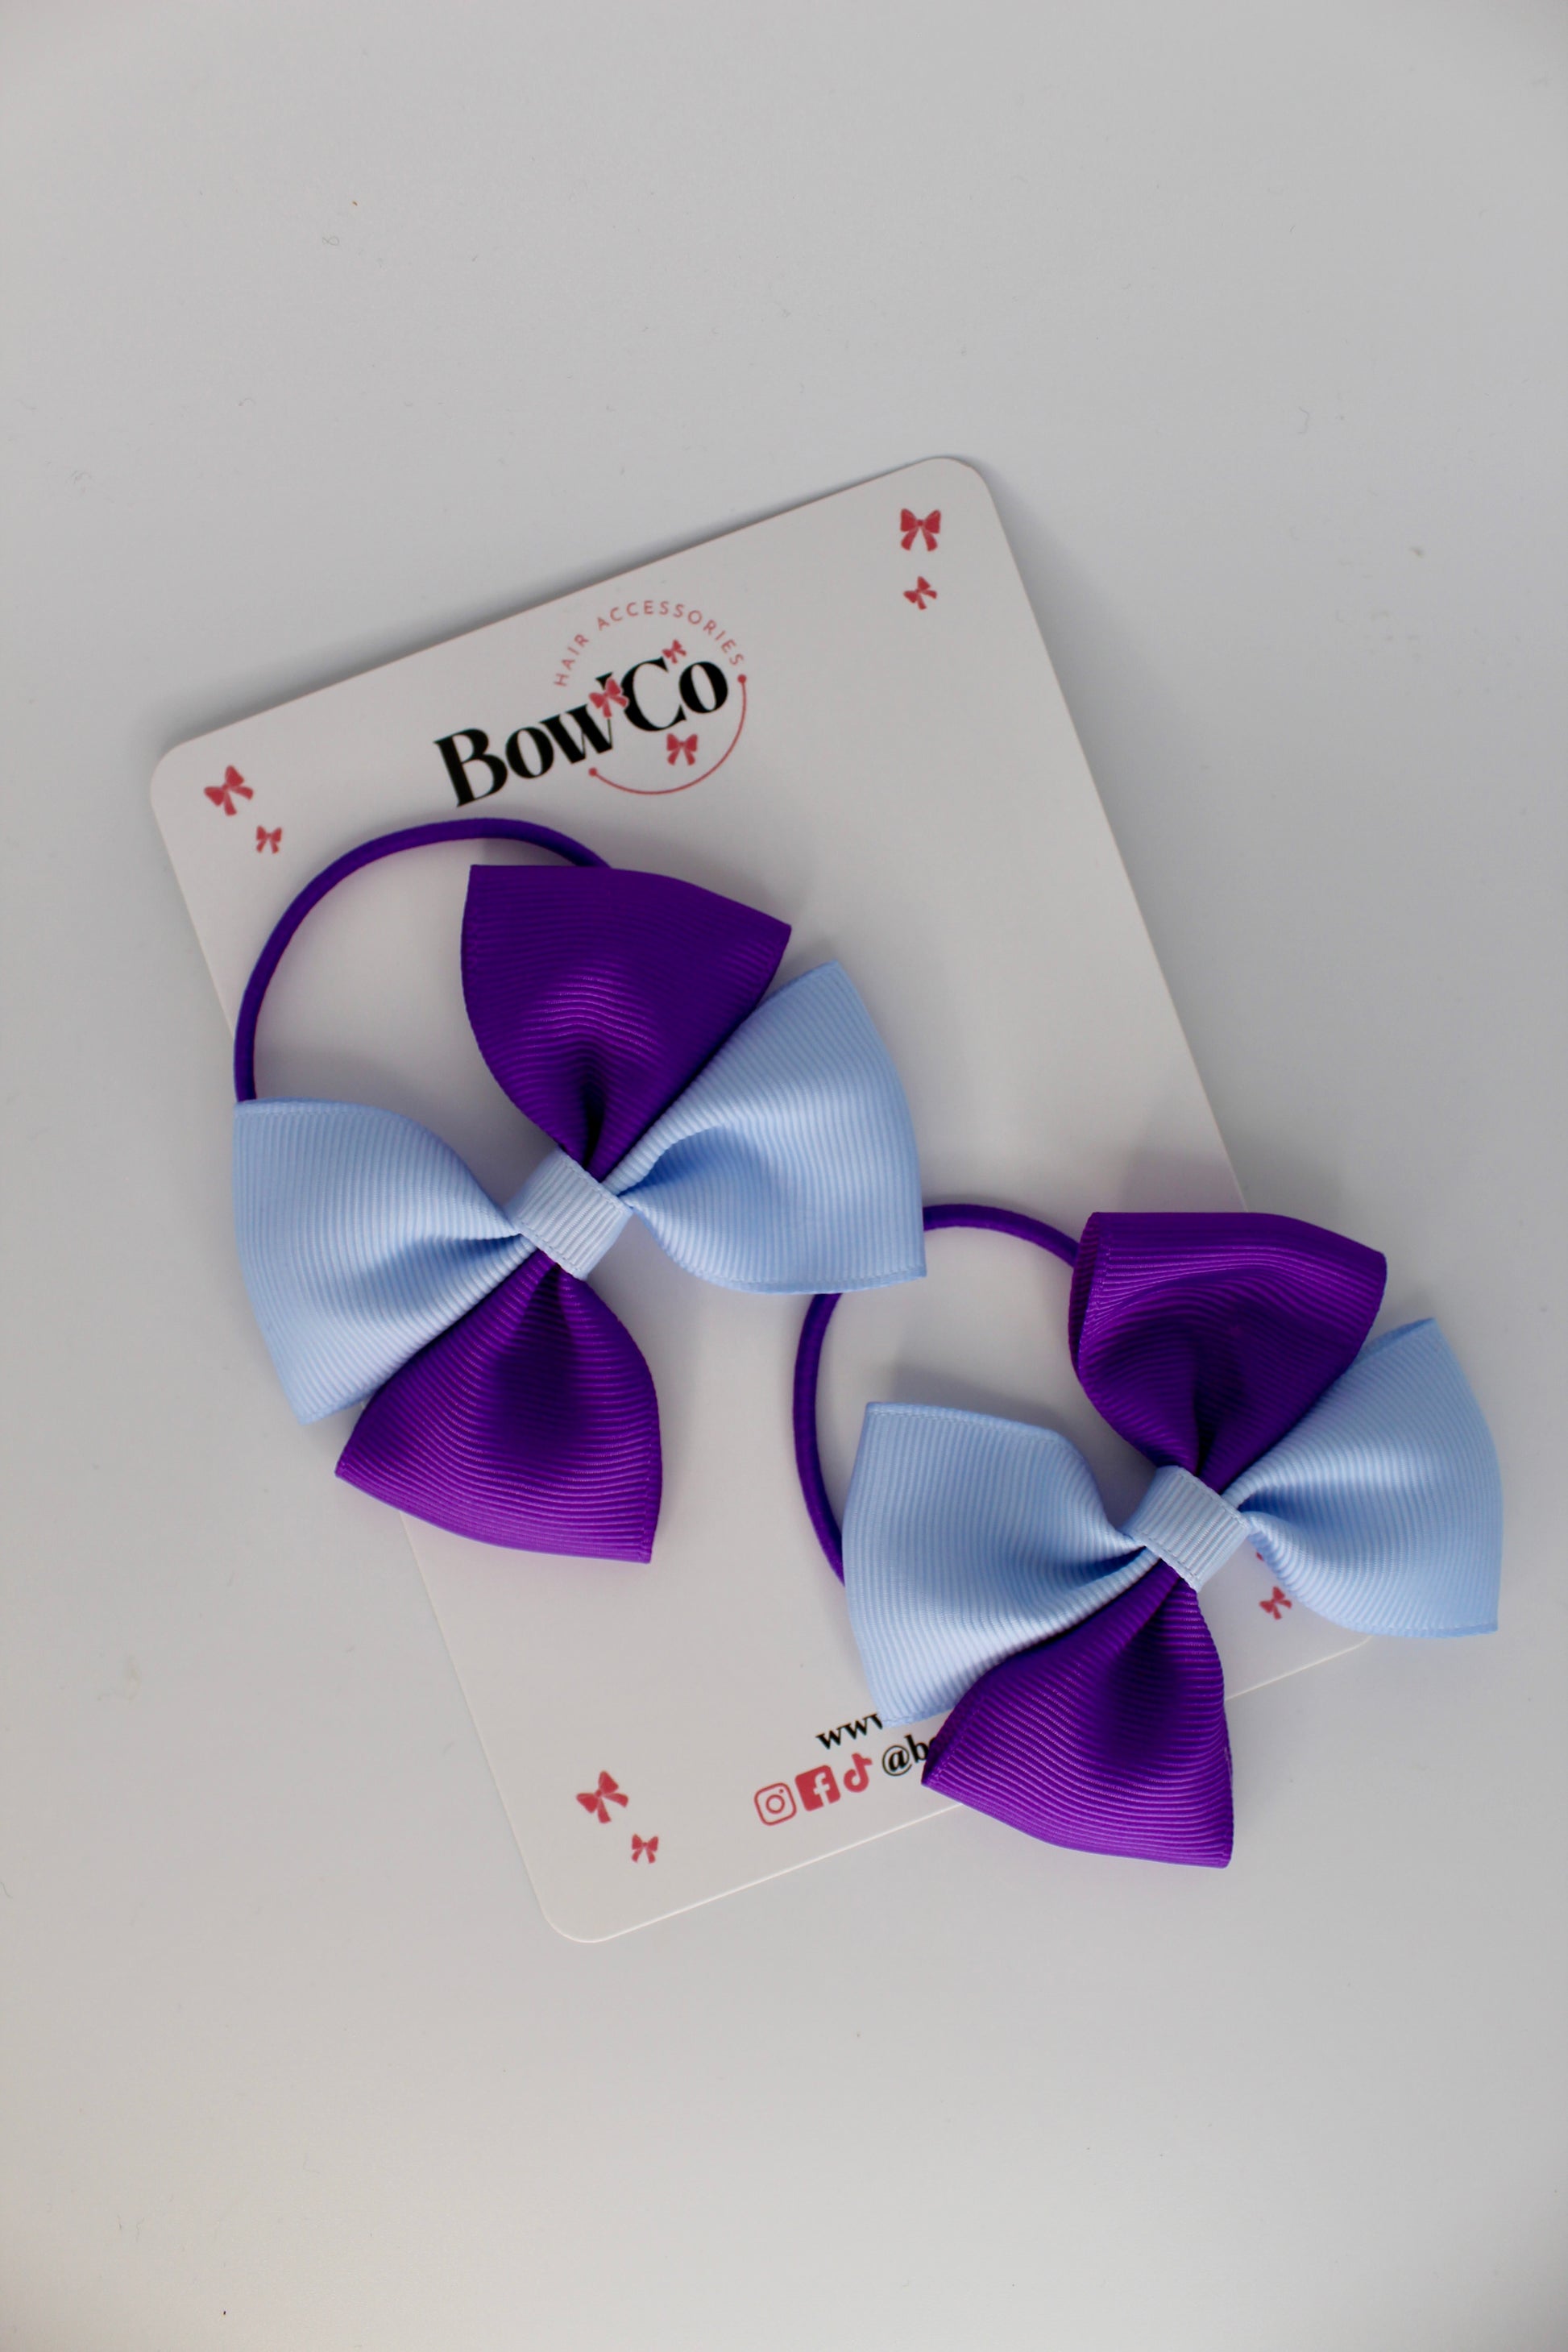 3 Inch Twist Bow - 2 Pack - Elastic Band - Purple and Bluebell